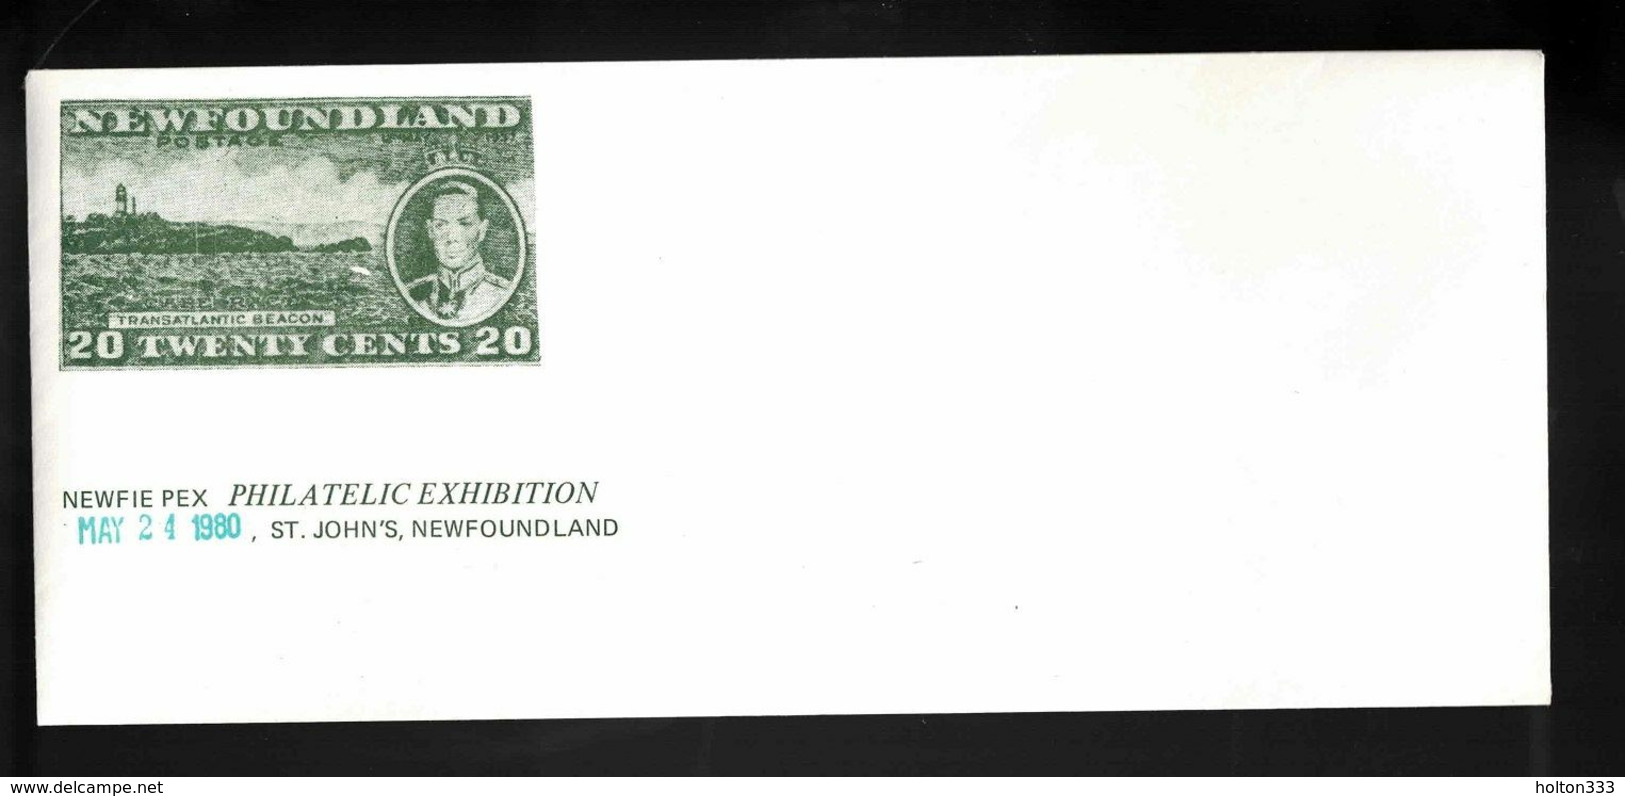 NEWFOUNDLAND Cover Blank - Two Newfie Pex Exhibition May 1980 - Commemorative Covers